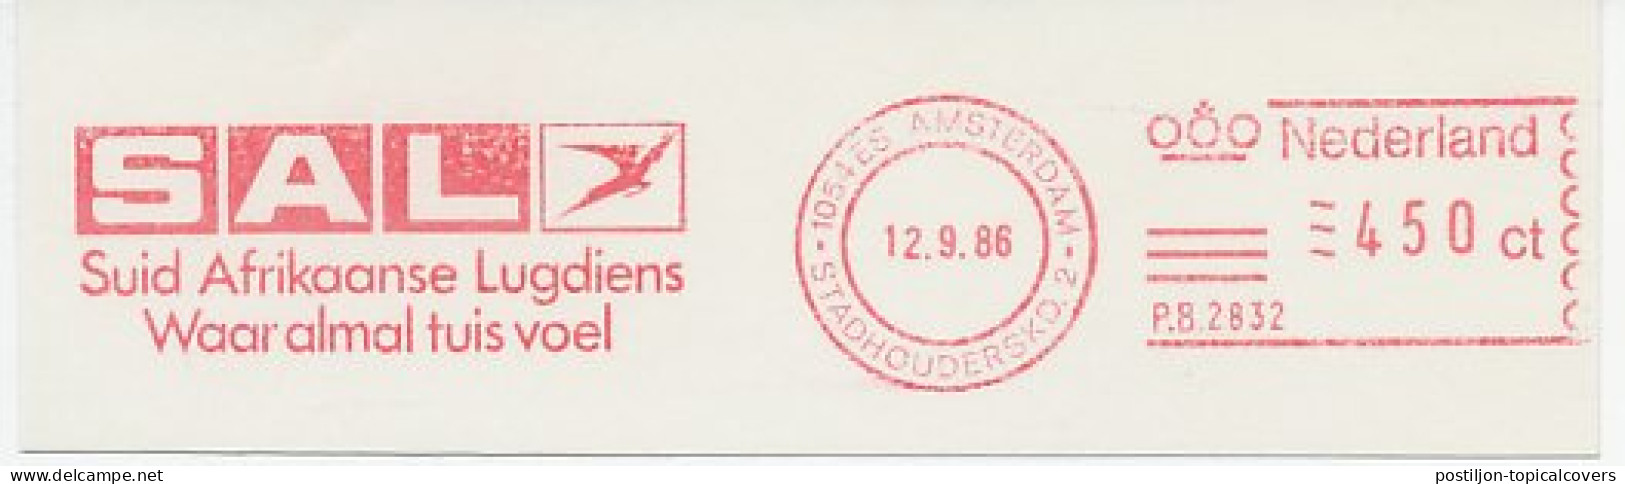 Meter Cut Netherlands 1986 SAL - South African Airline - Airplanes